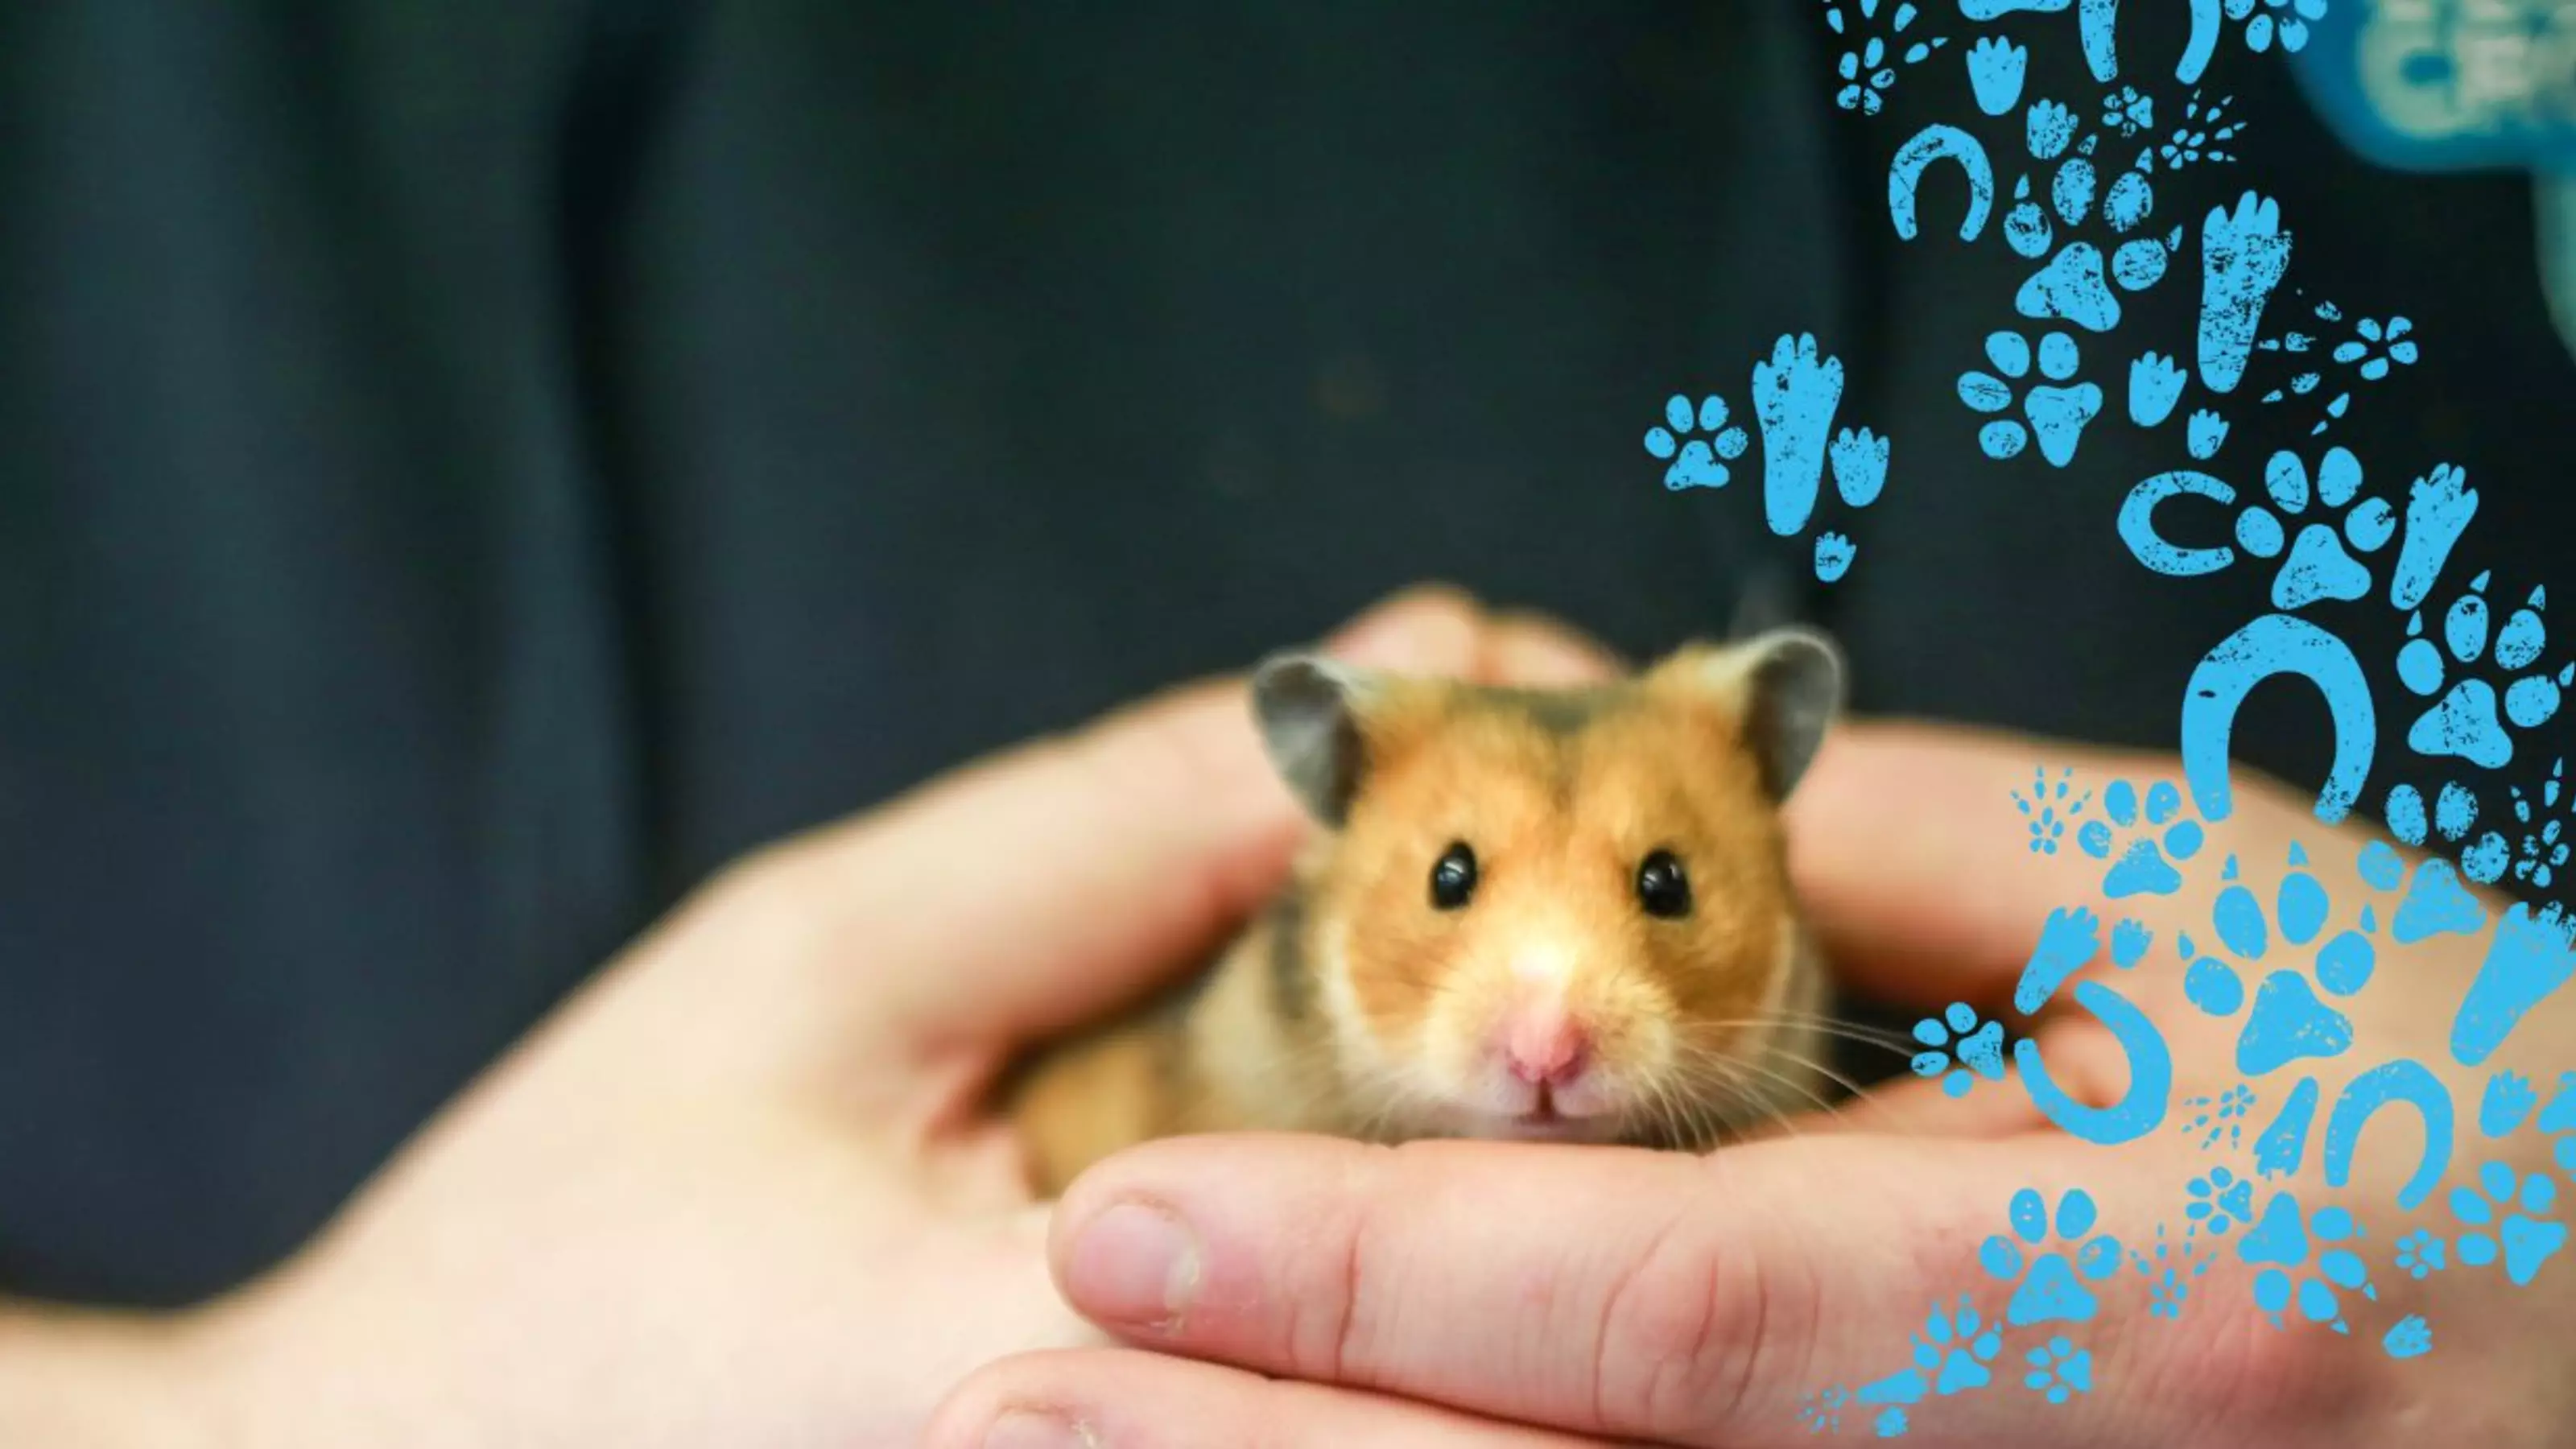 A brown and white hamster being held in a person's hands